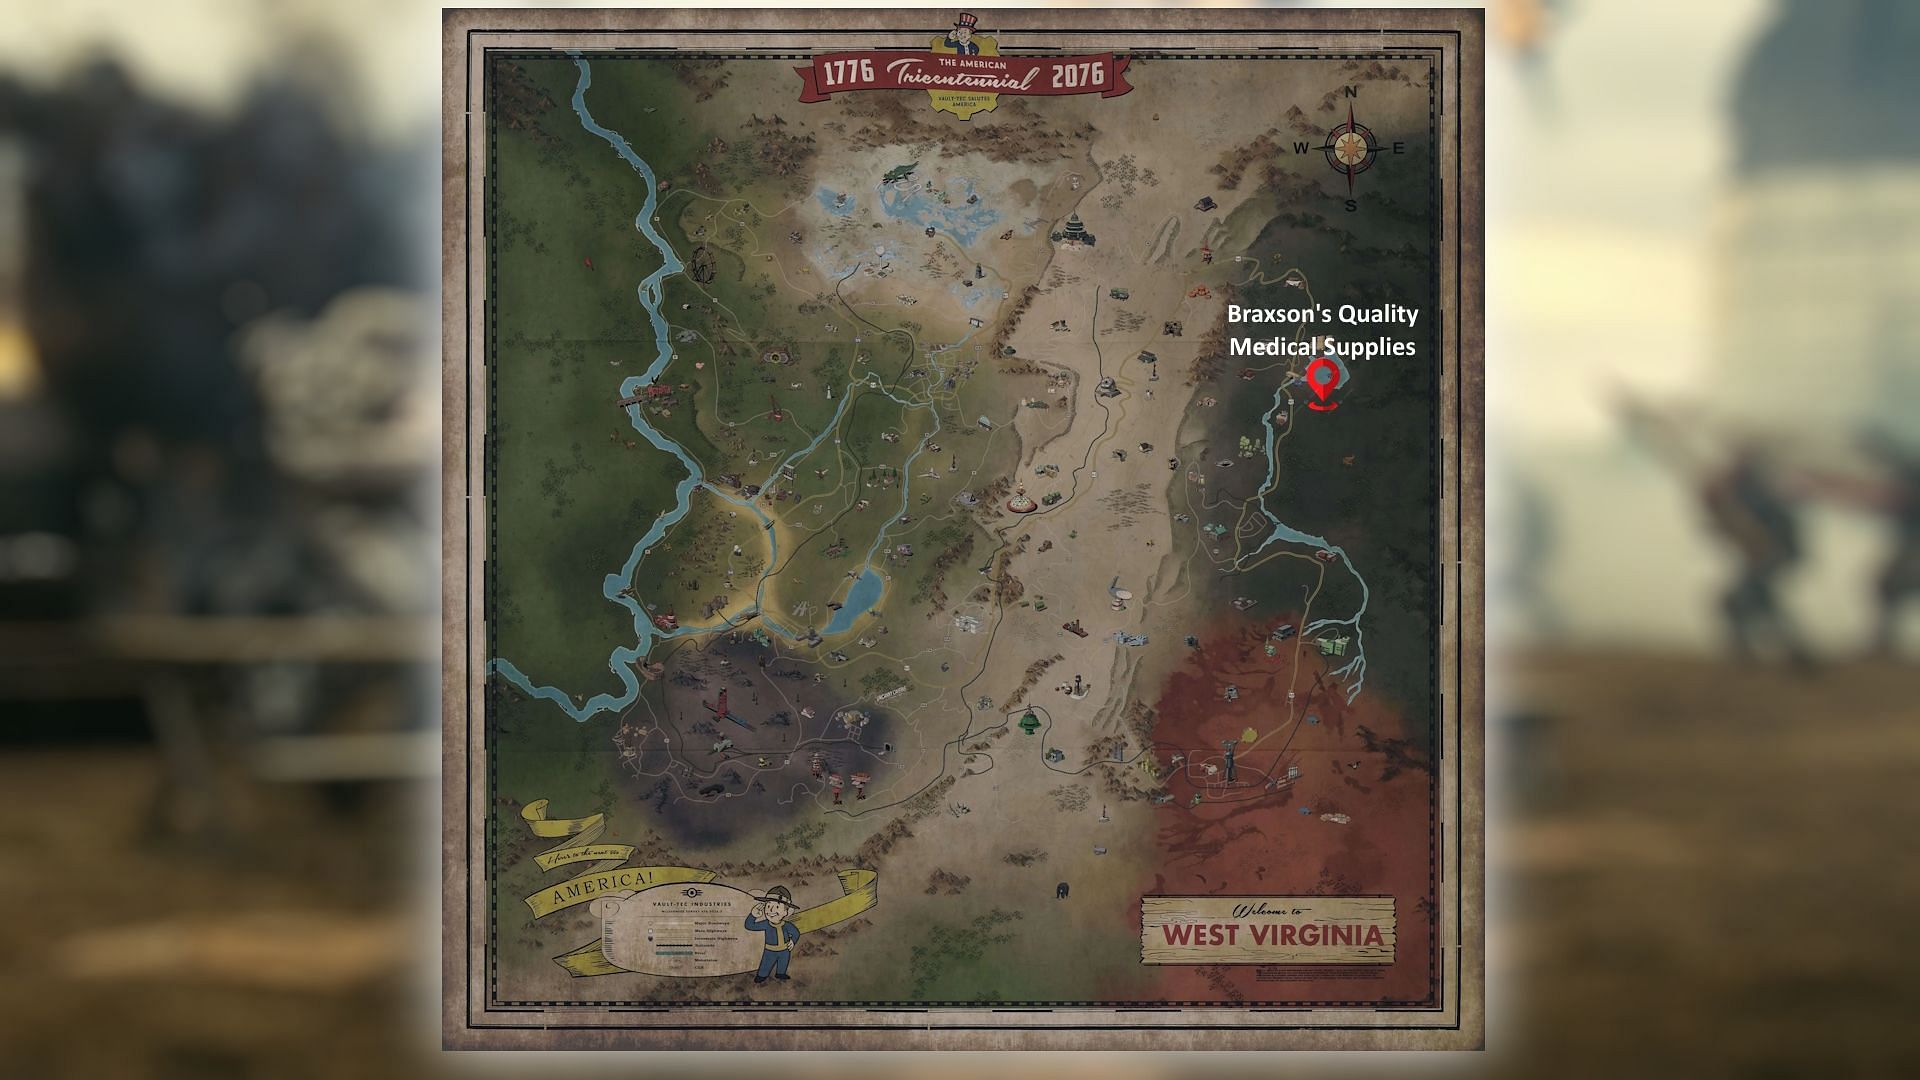 Braxson&#039;s Quality Medical Supplies is located in the Mire region of Appalachia (Image via Bethesda Game Studios)